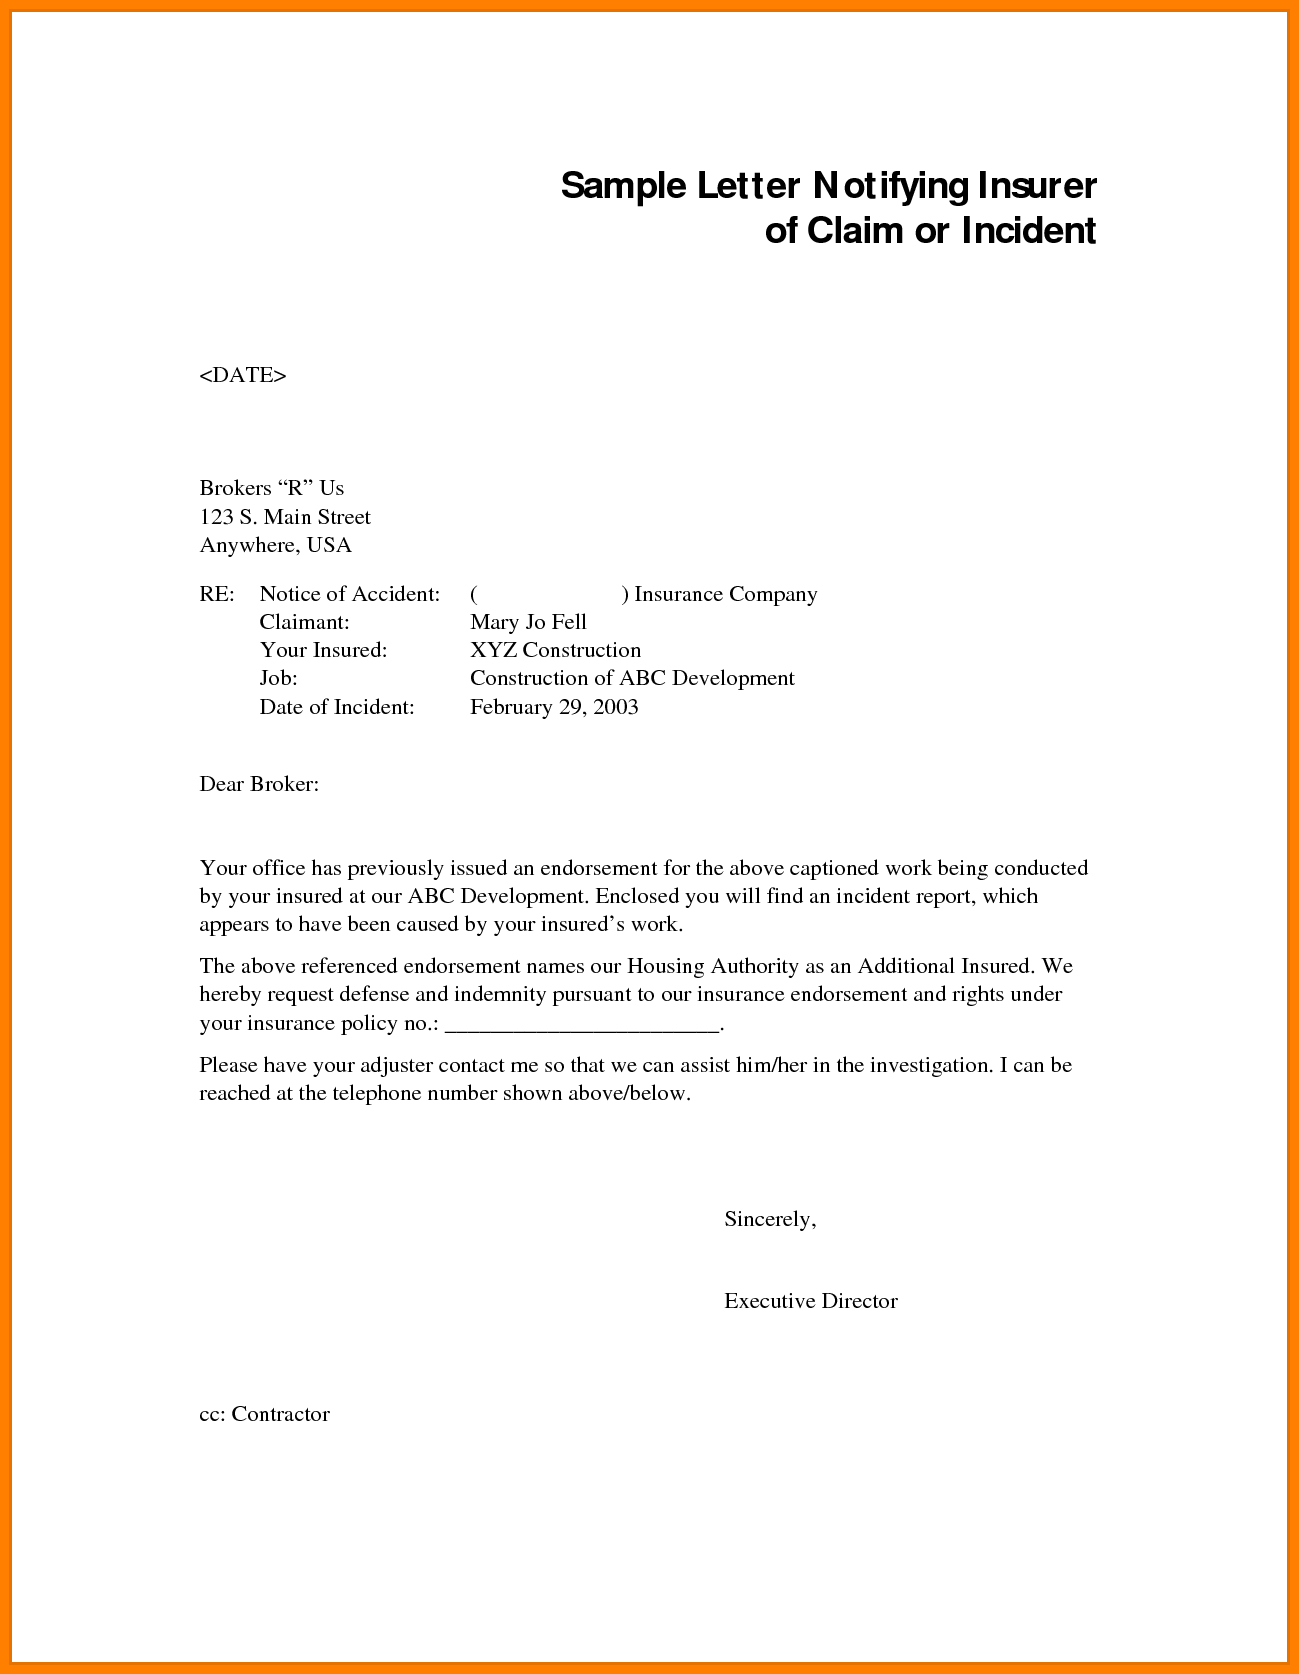 031 Marketing Plan Sample Outline Of Incident Report Letter With Insurance Incident Report Template